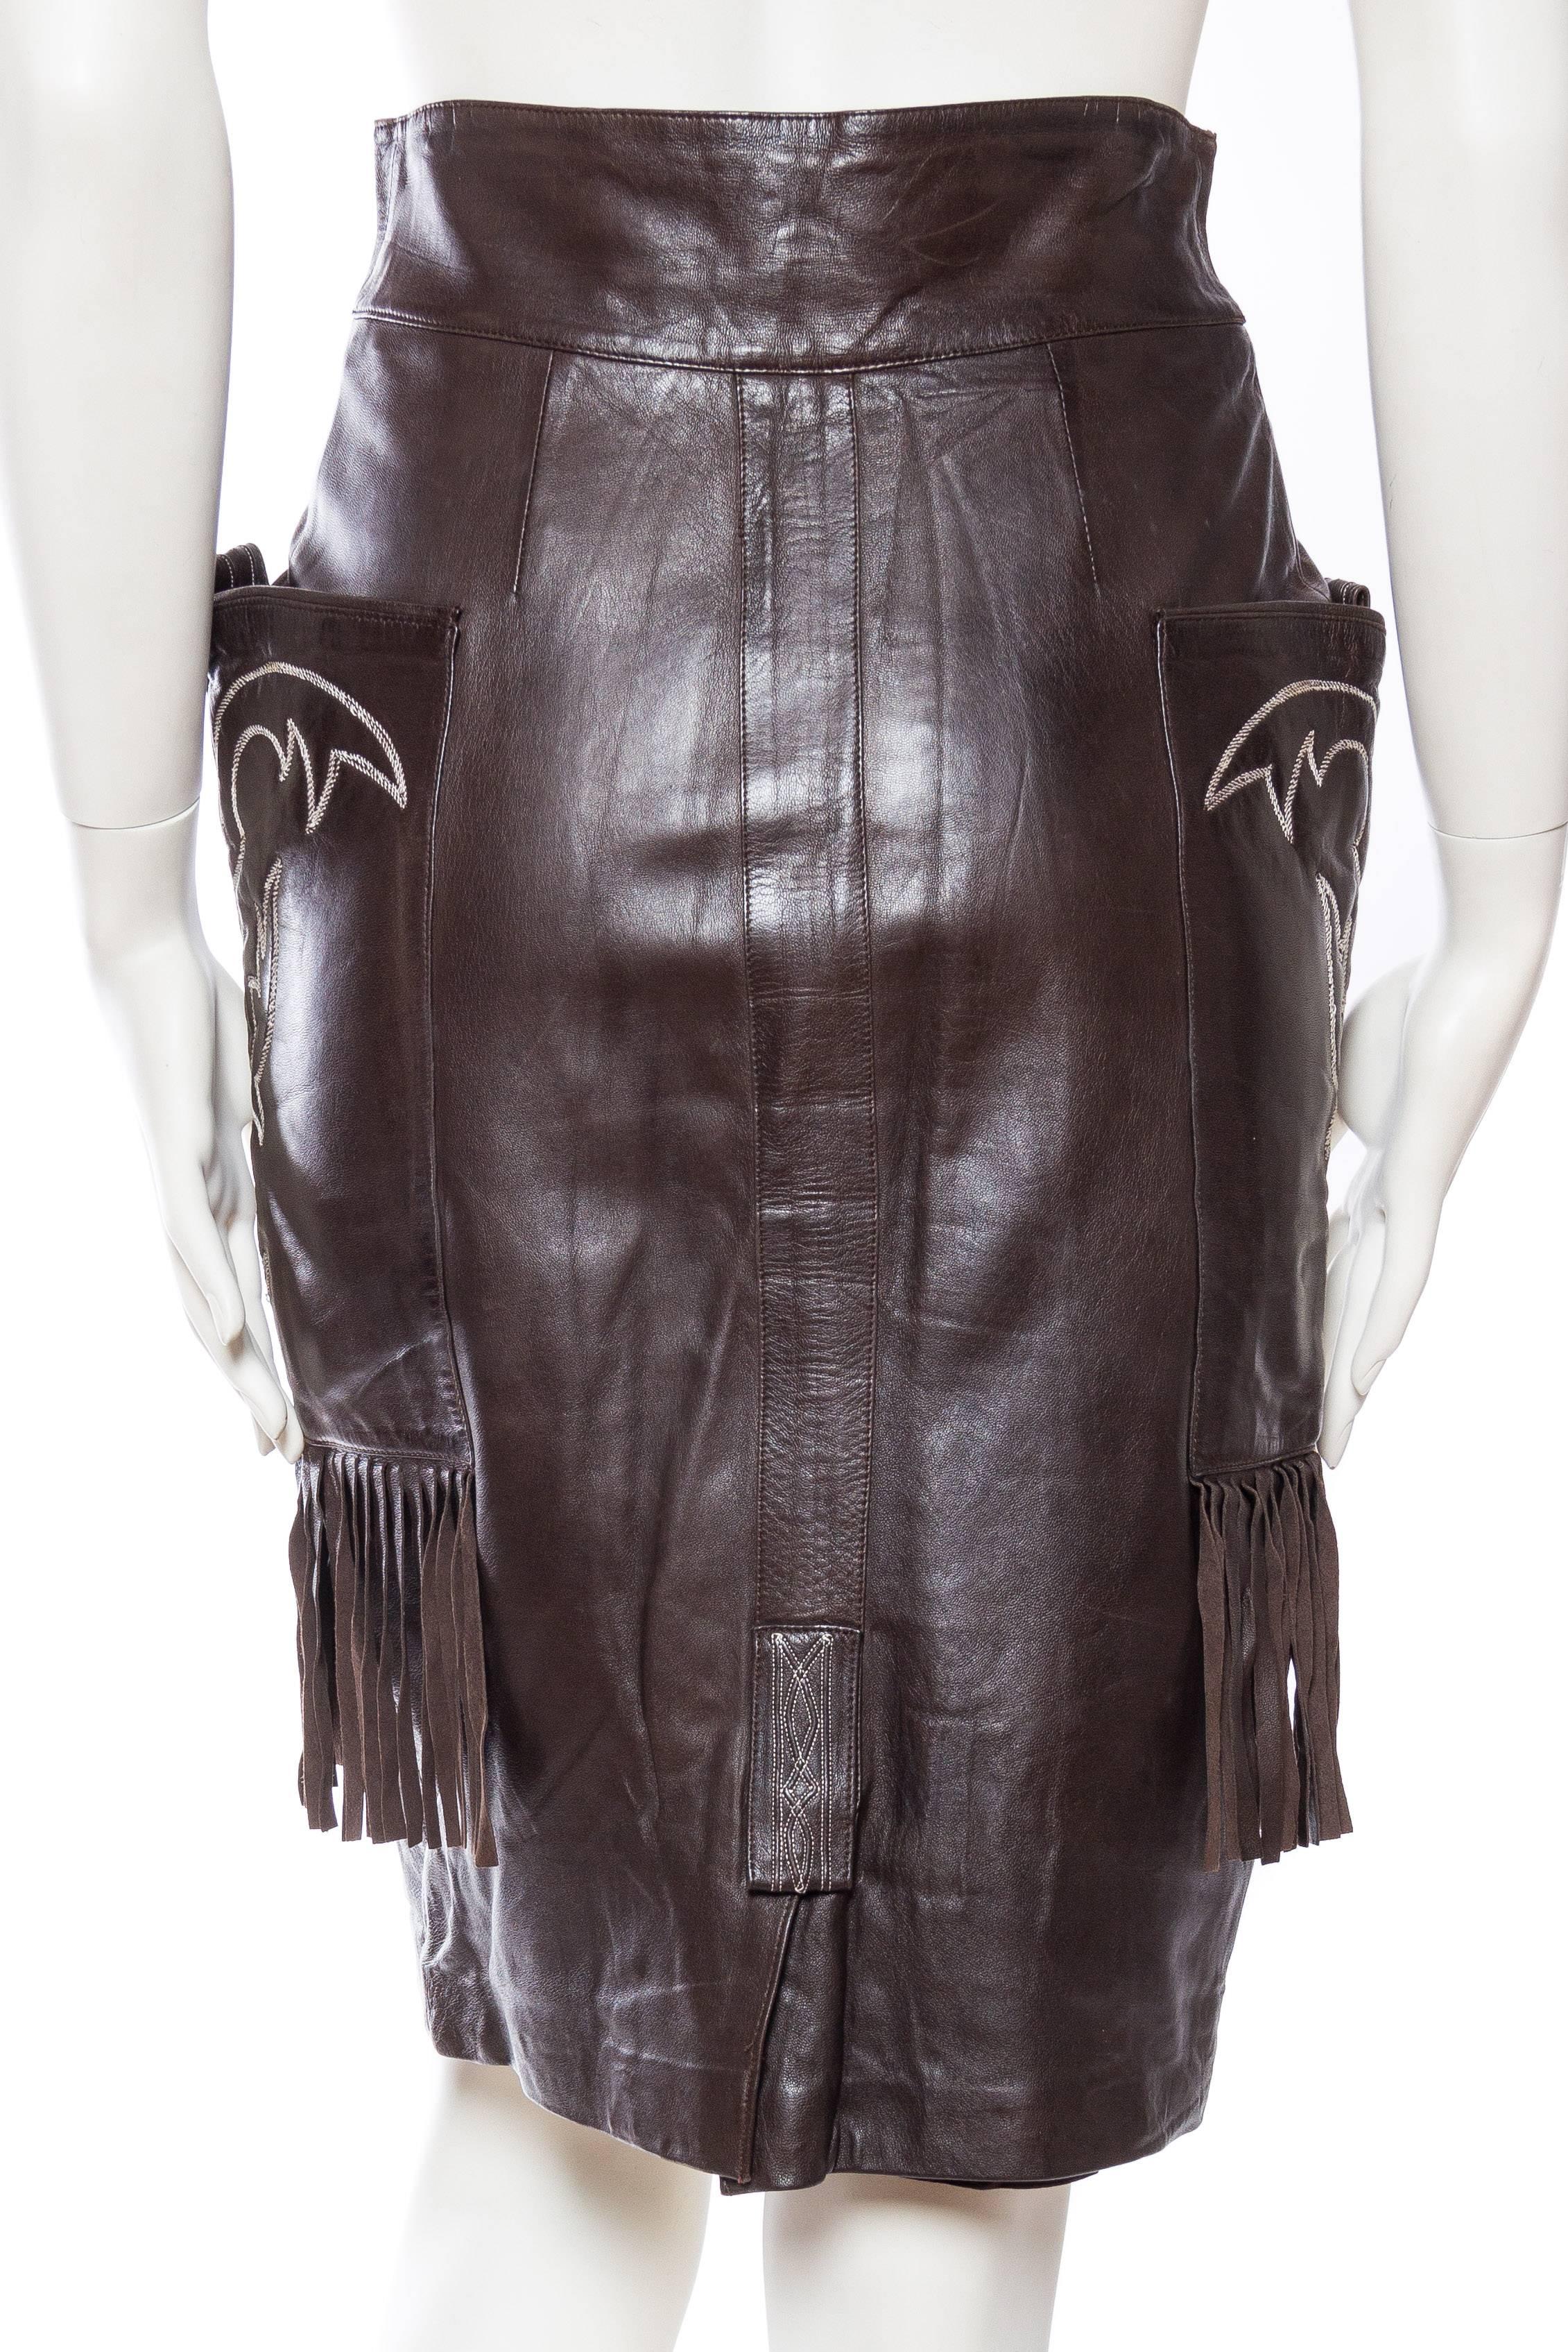 Black Famous Claude Montana Western Leather Skirt with Fringe